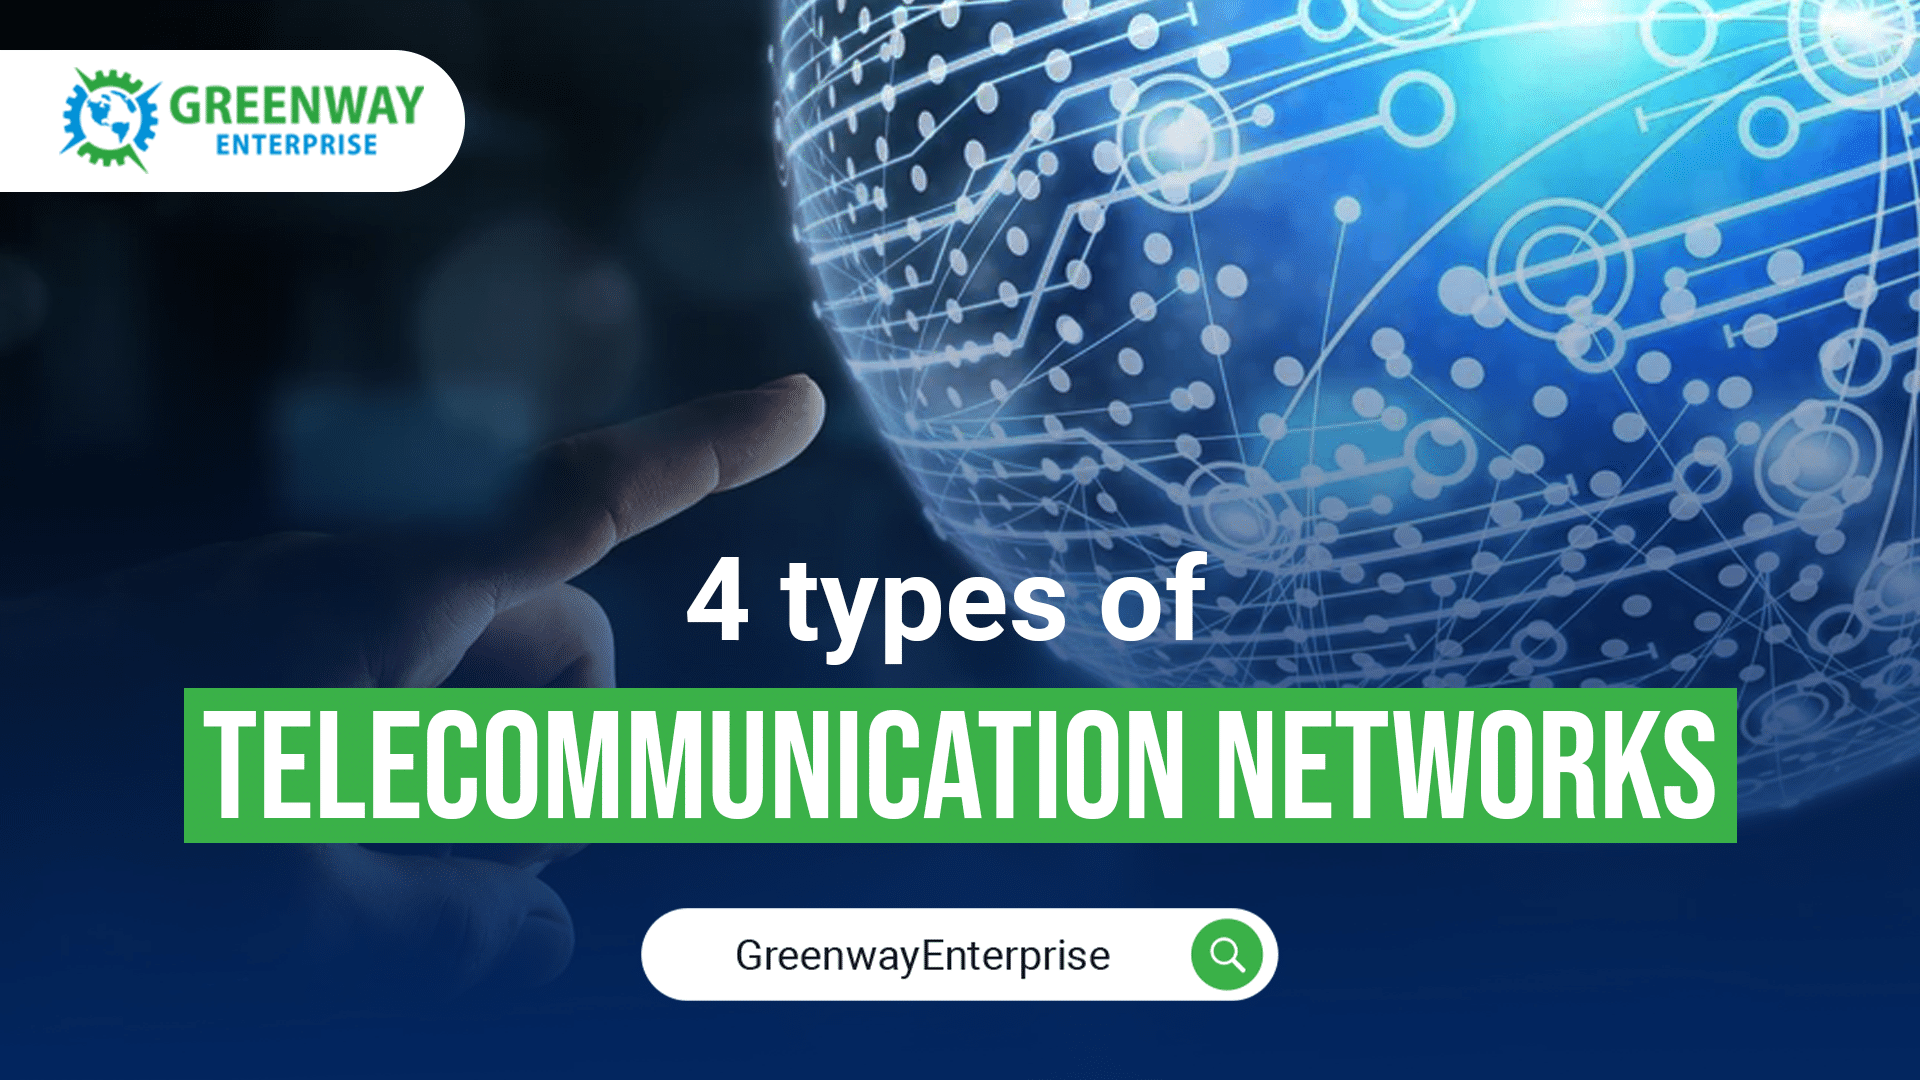 4 types of telecommunication networks